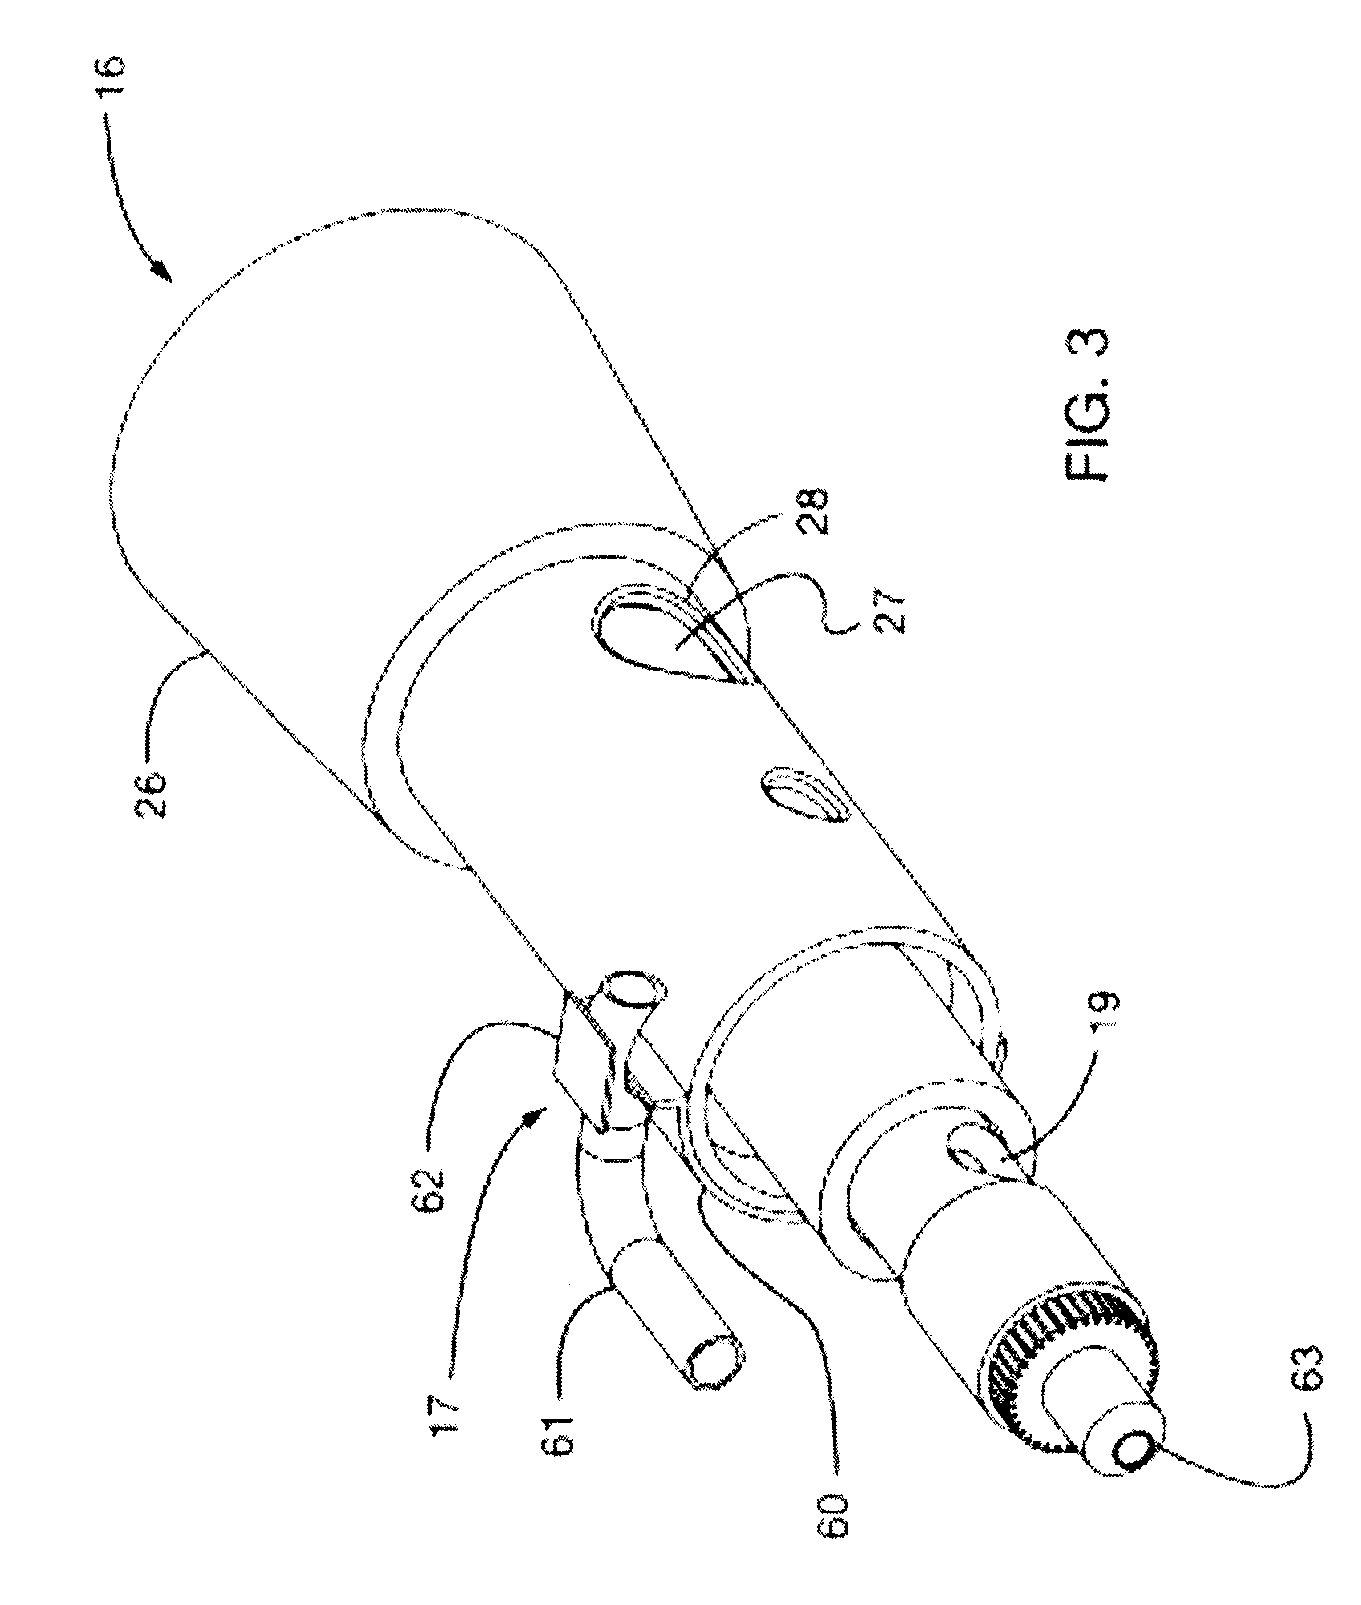 Portable devices for generating an inhalable vapor